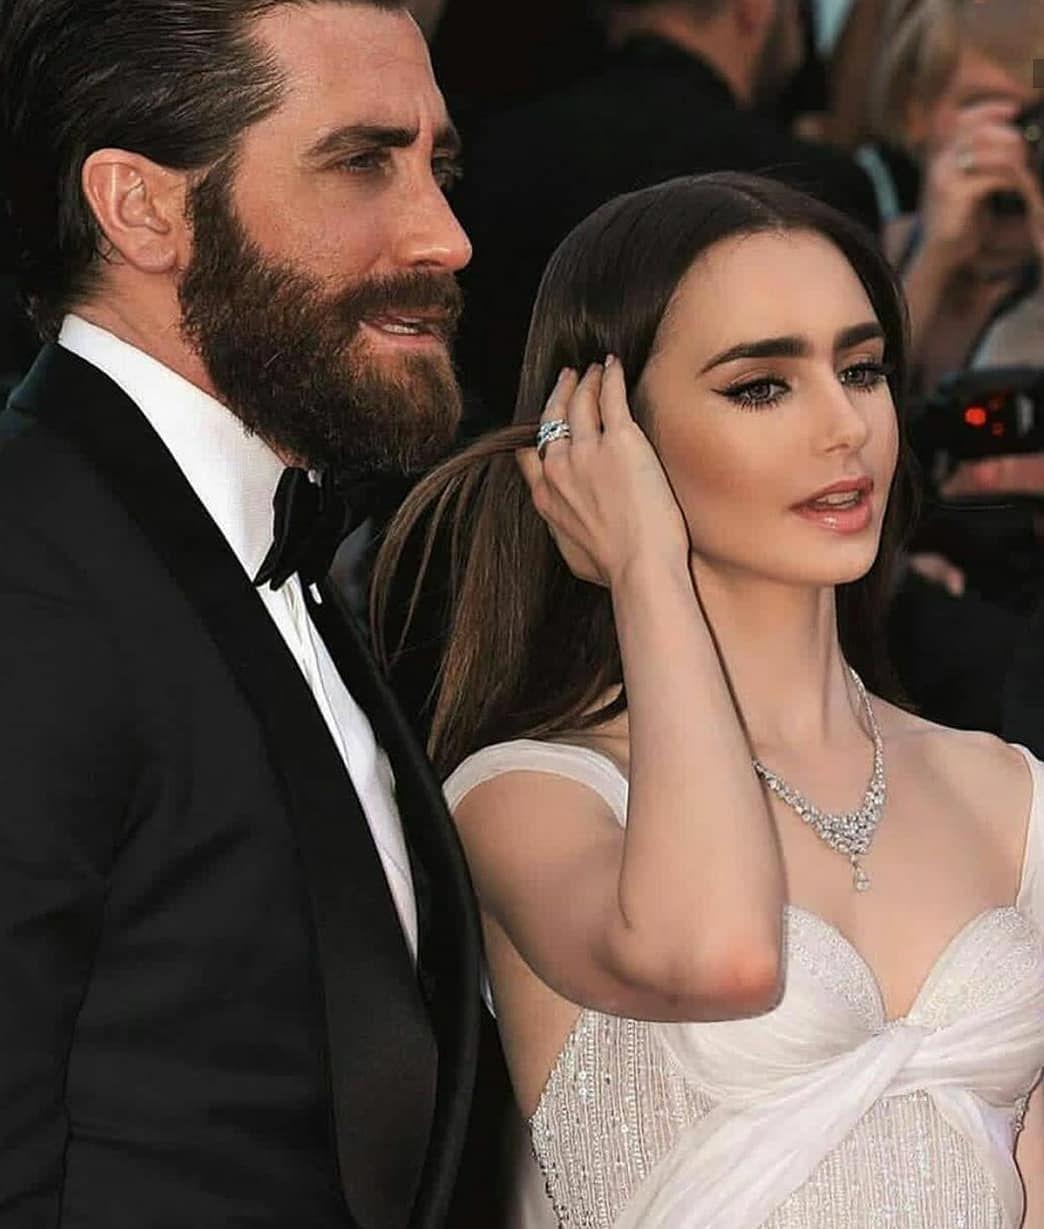 Lily Collins and Jack Gyllenhall at Cannes